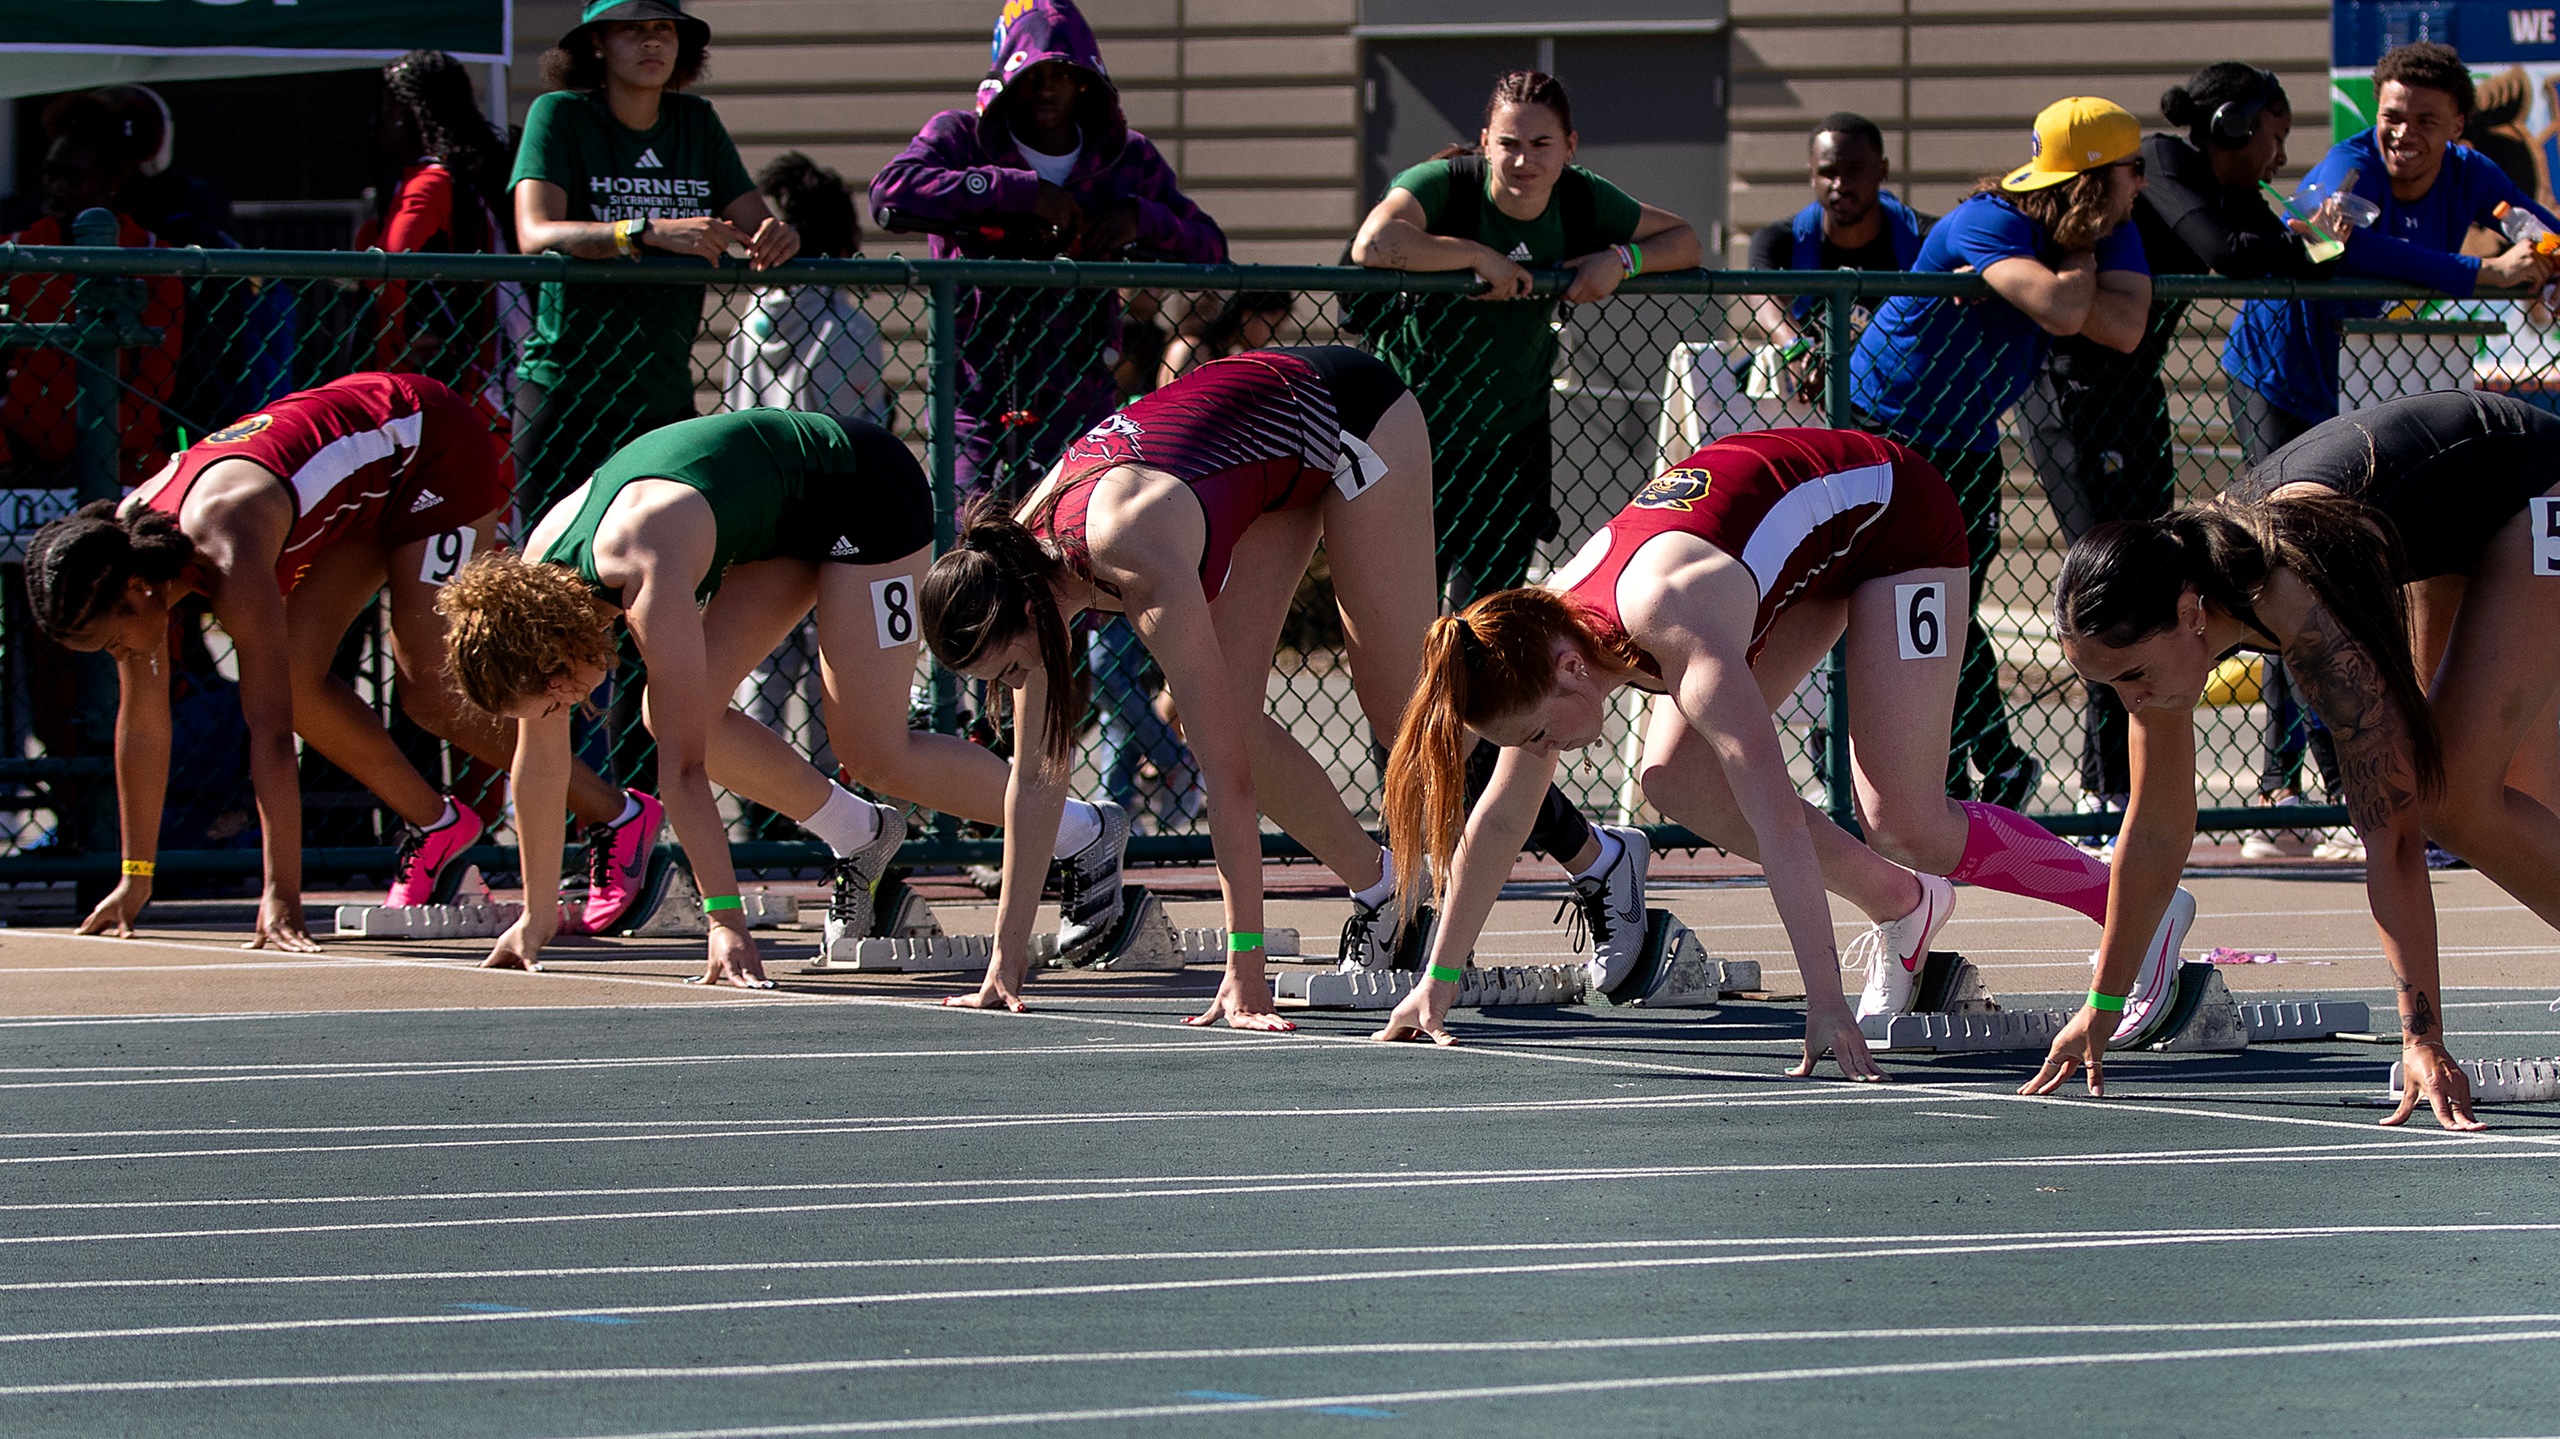 Women's Track competes at the Hornet Invitational against some top 4 year colleges and universities